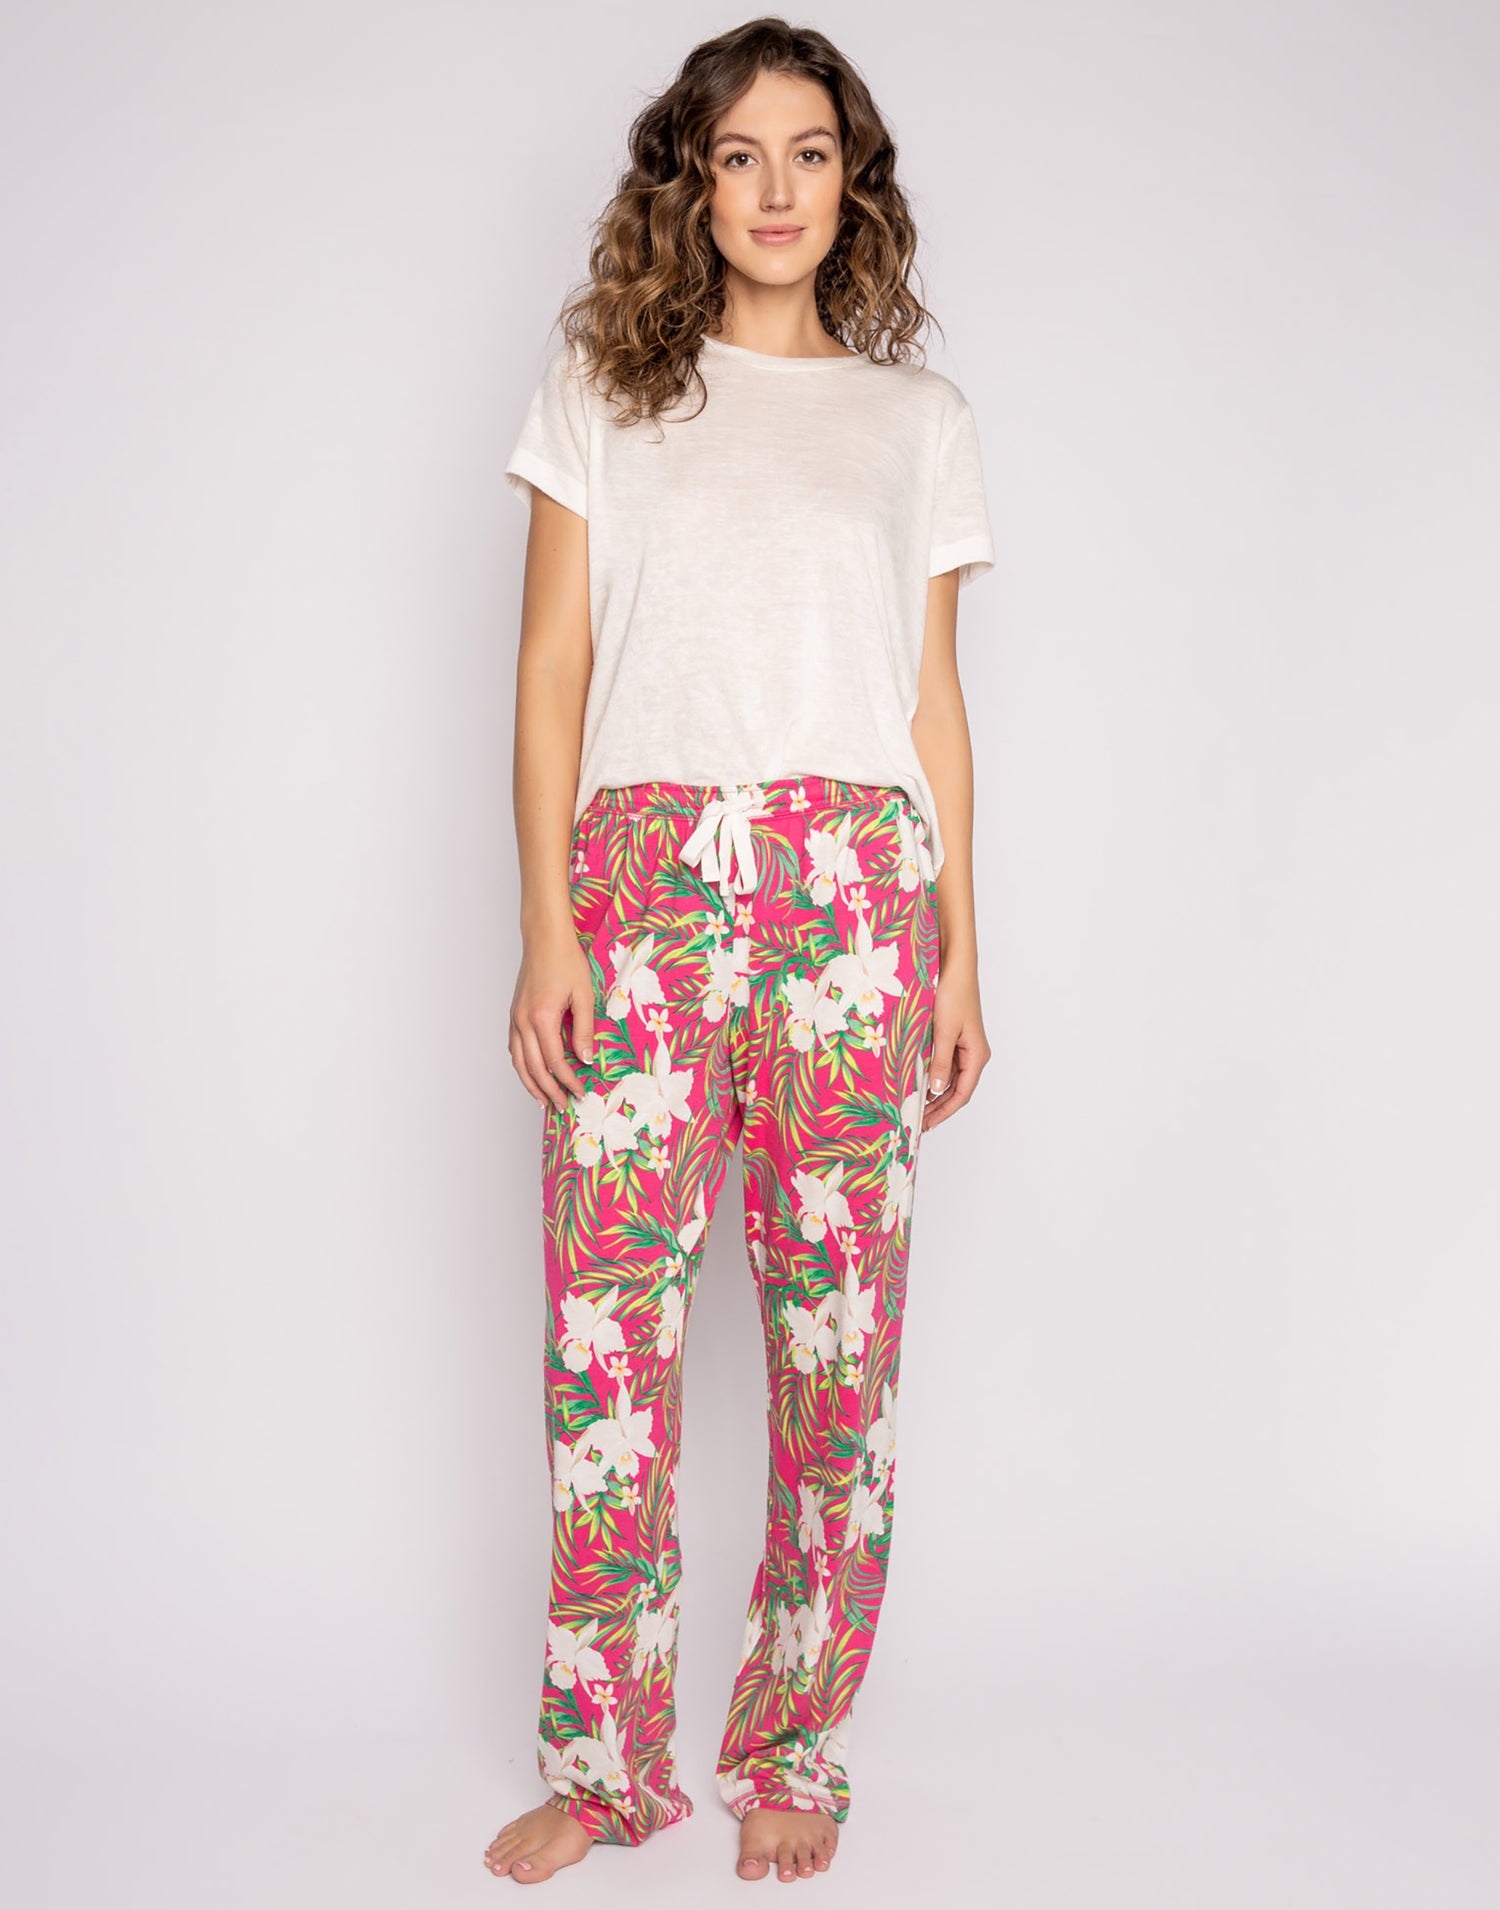 Playful Prints Pant by P.J. Salvage in Fuschia - Front View